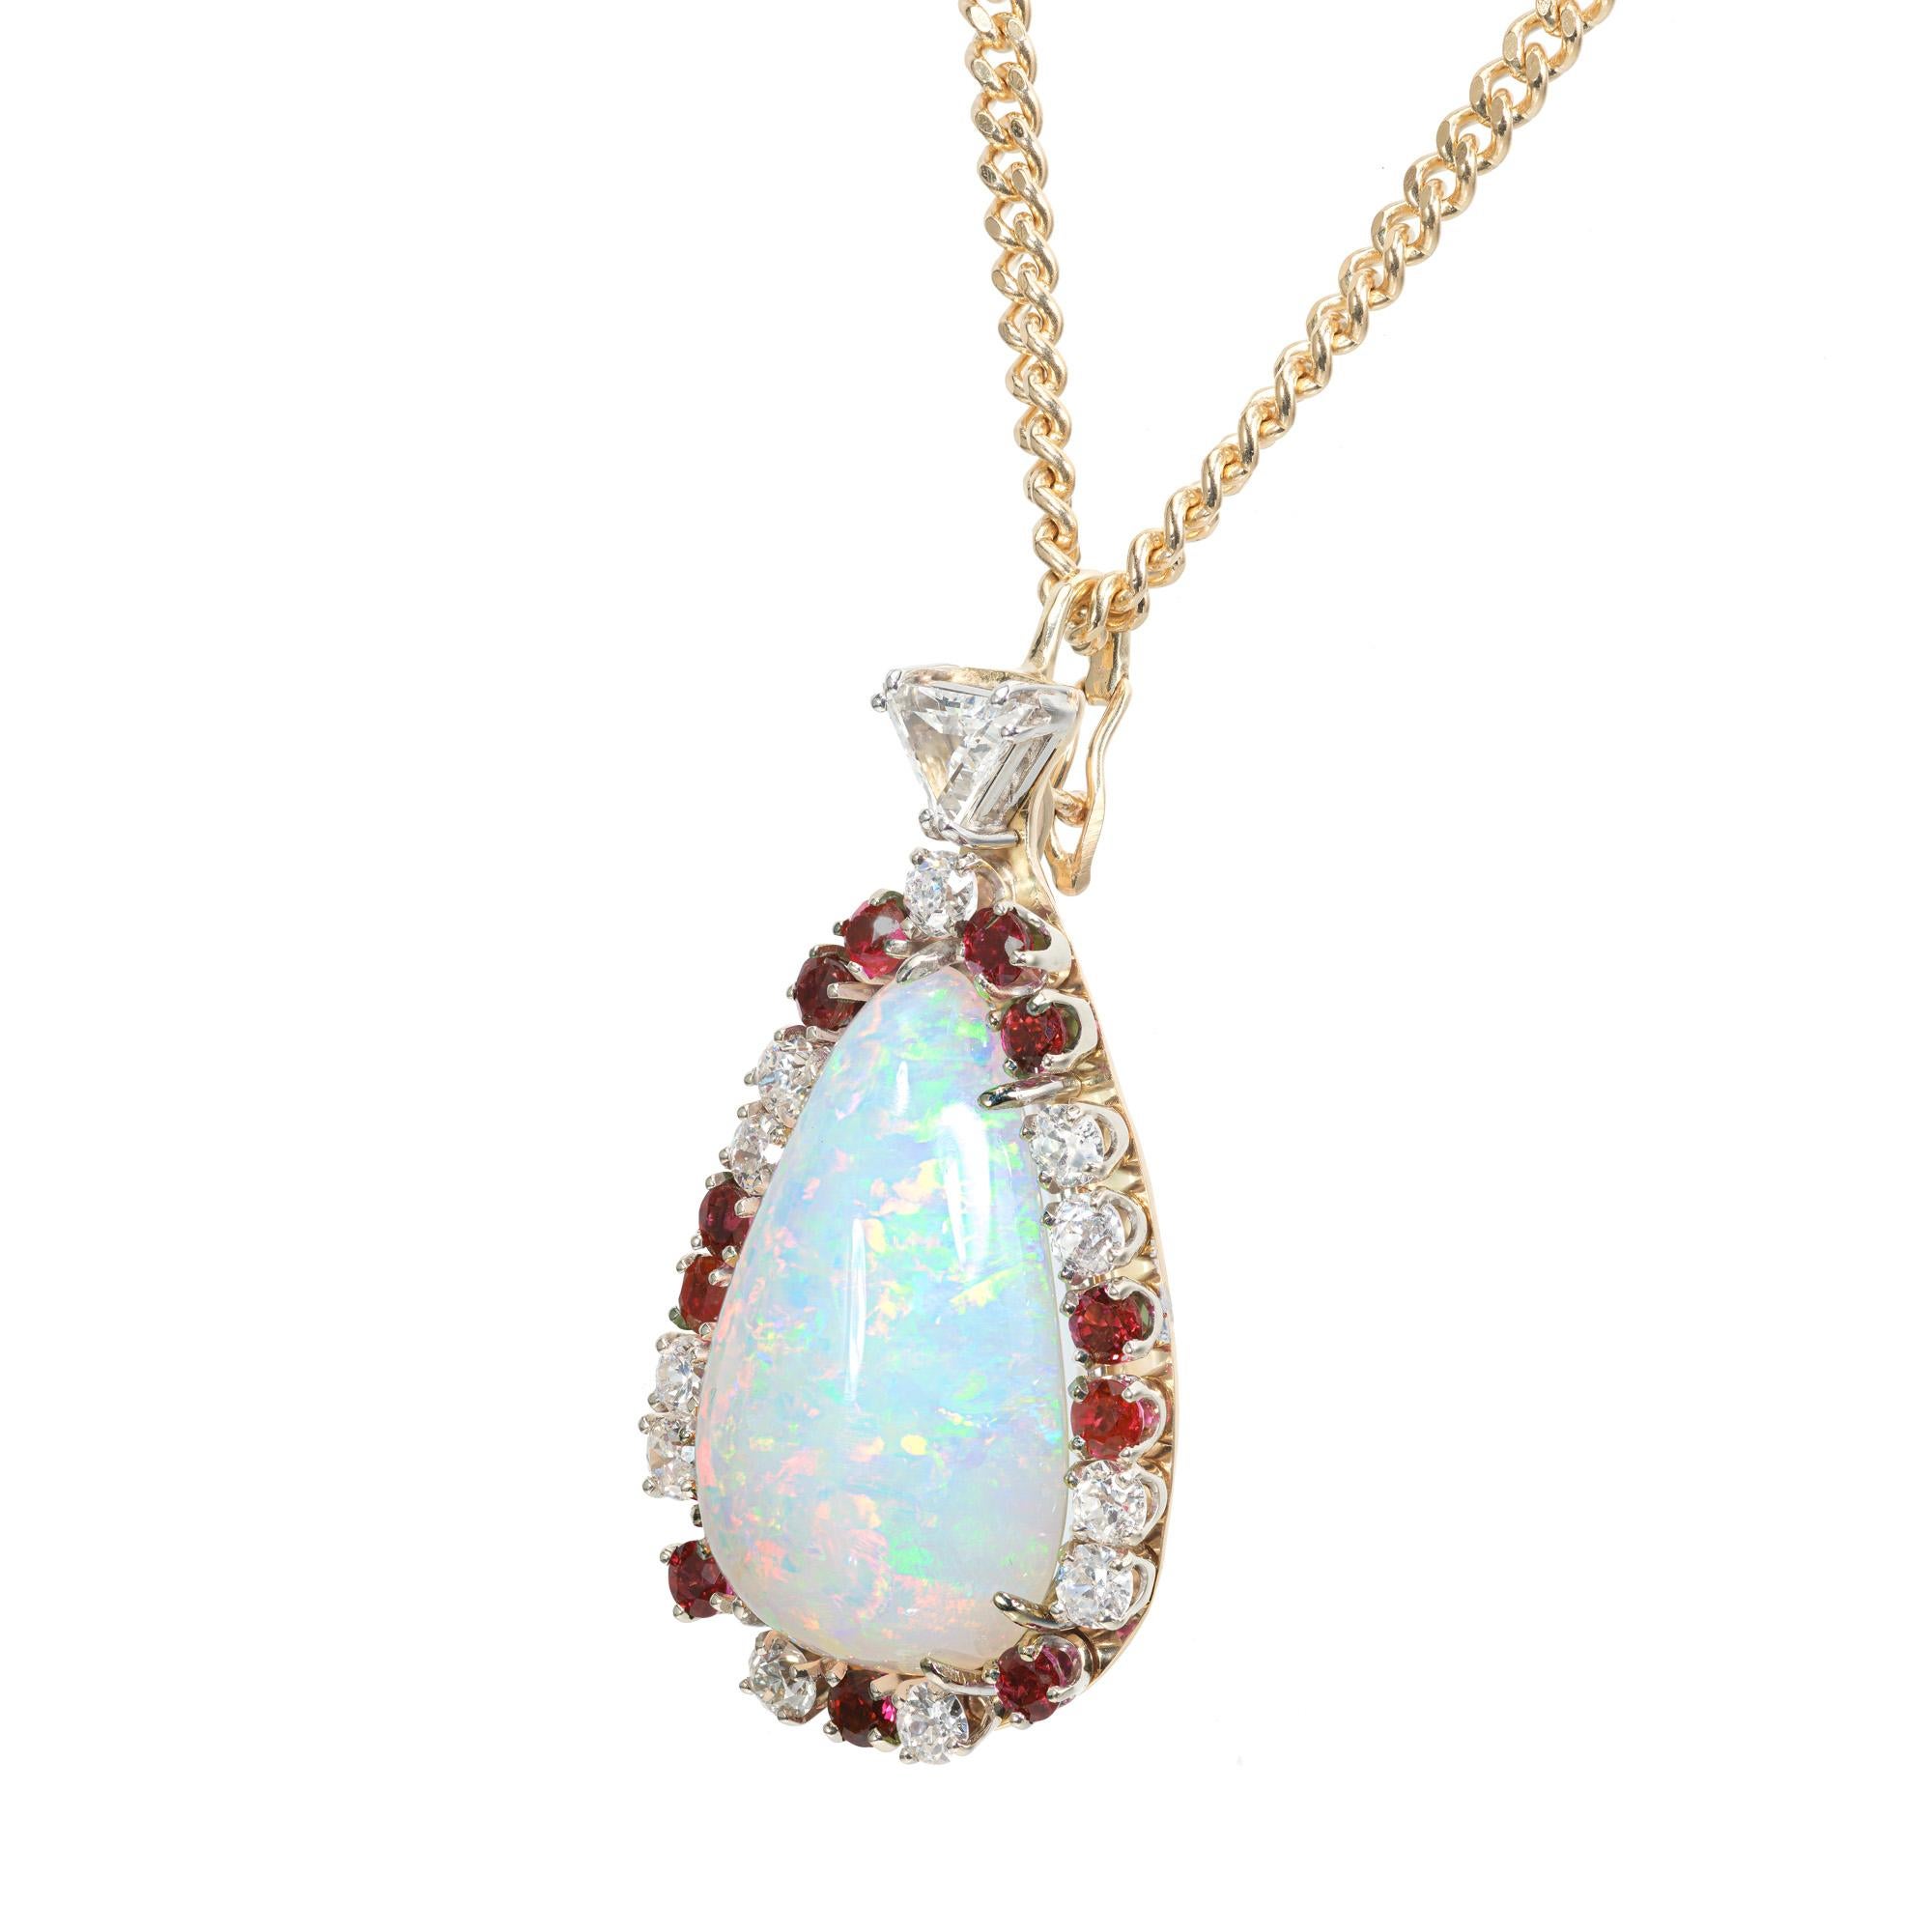 1960's Opal, ruby and diamond pendant necklace. GIA certified 27.03 carat pear shape opal with a halo of 11 round diamonds and 11 round rubies. Accented with 1 trilliant cut diamond in a 14k yellow and white gold setting with a 22 inch yellow gold